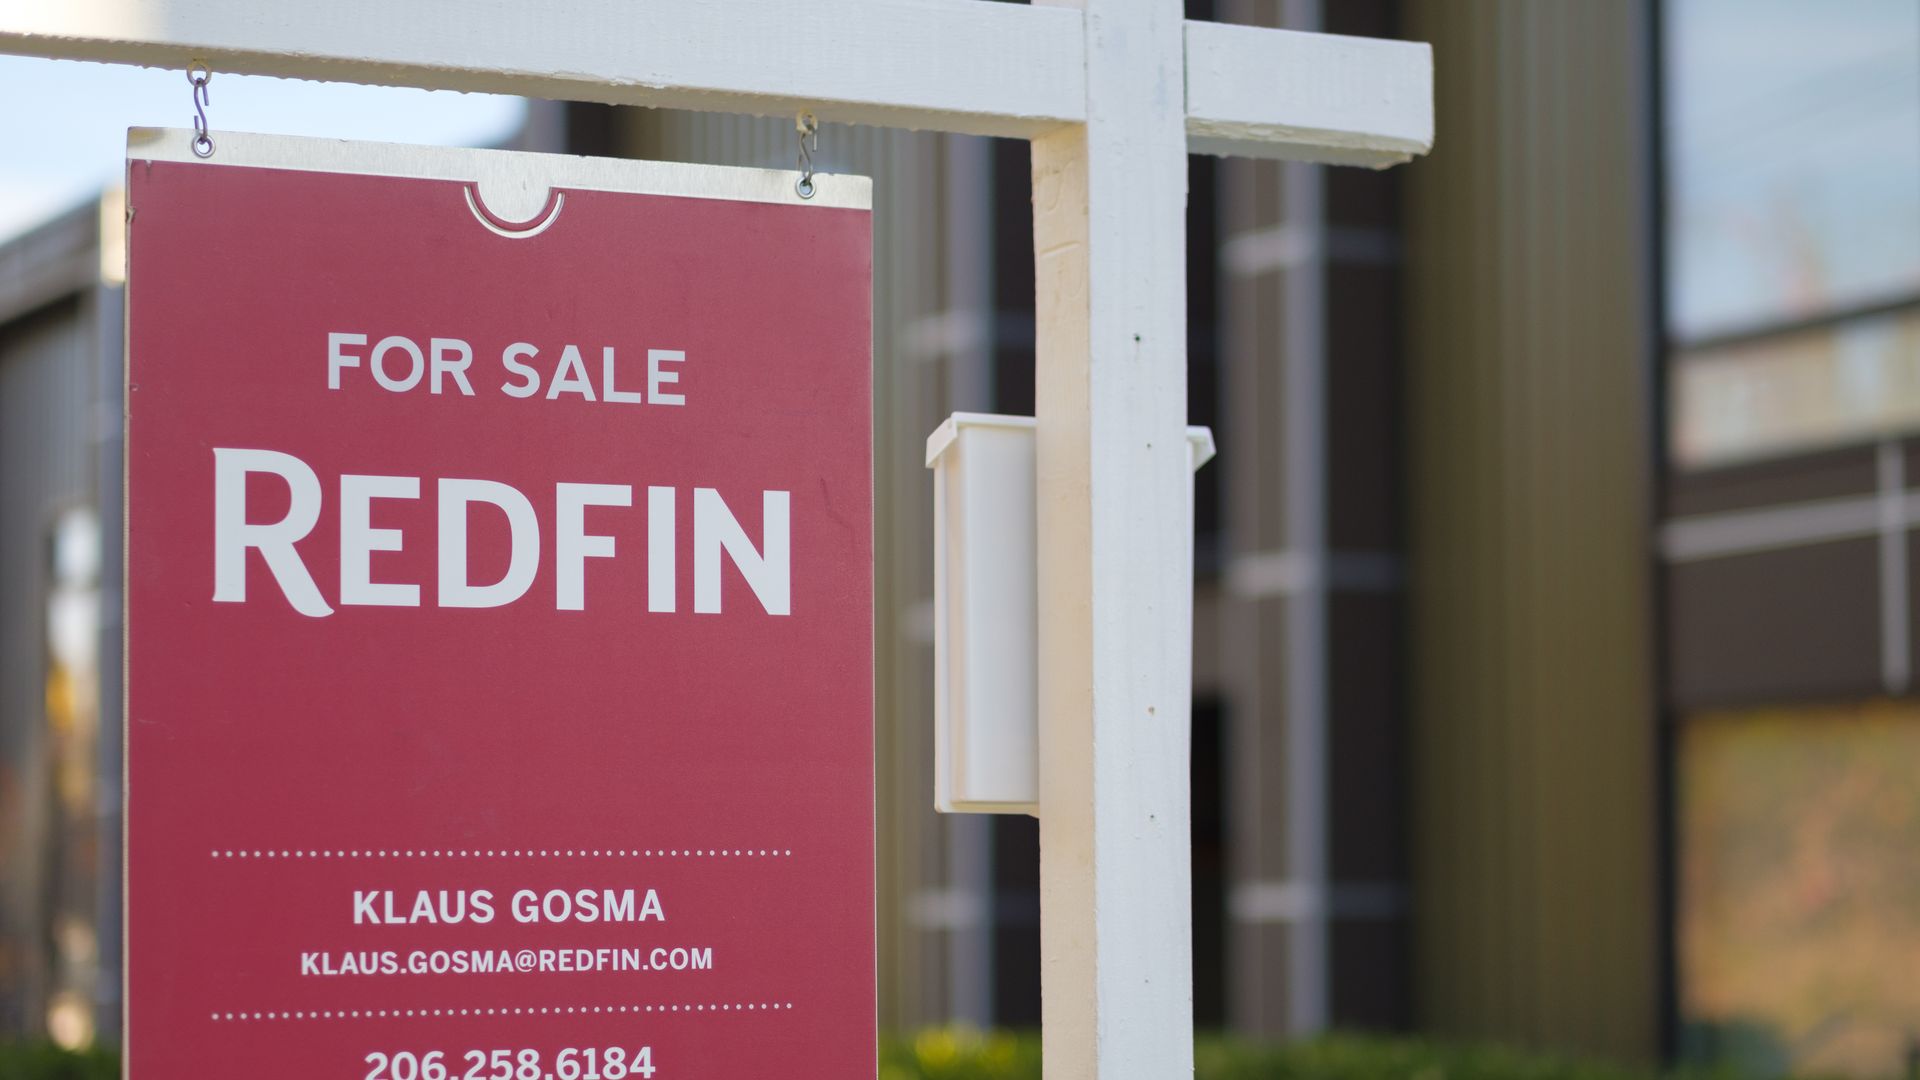 A Redfin "for sale" sign